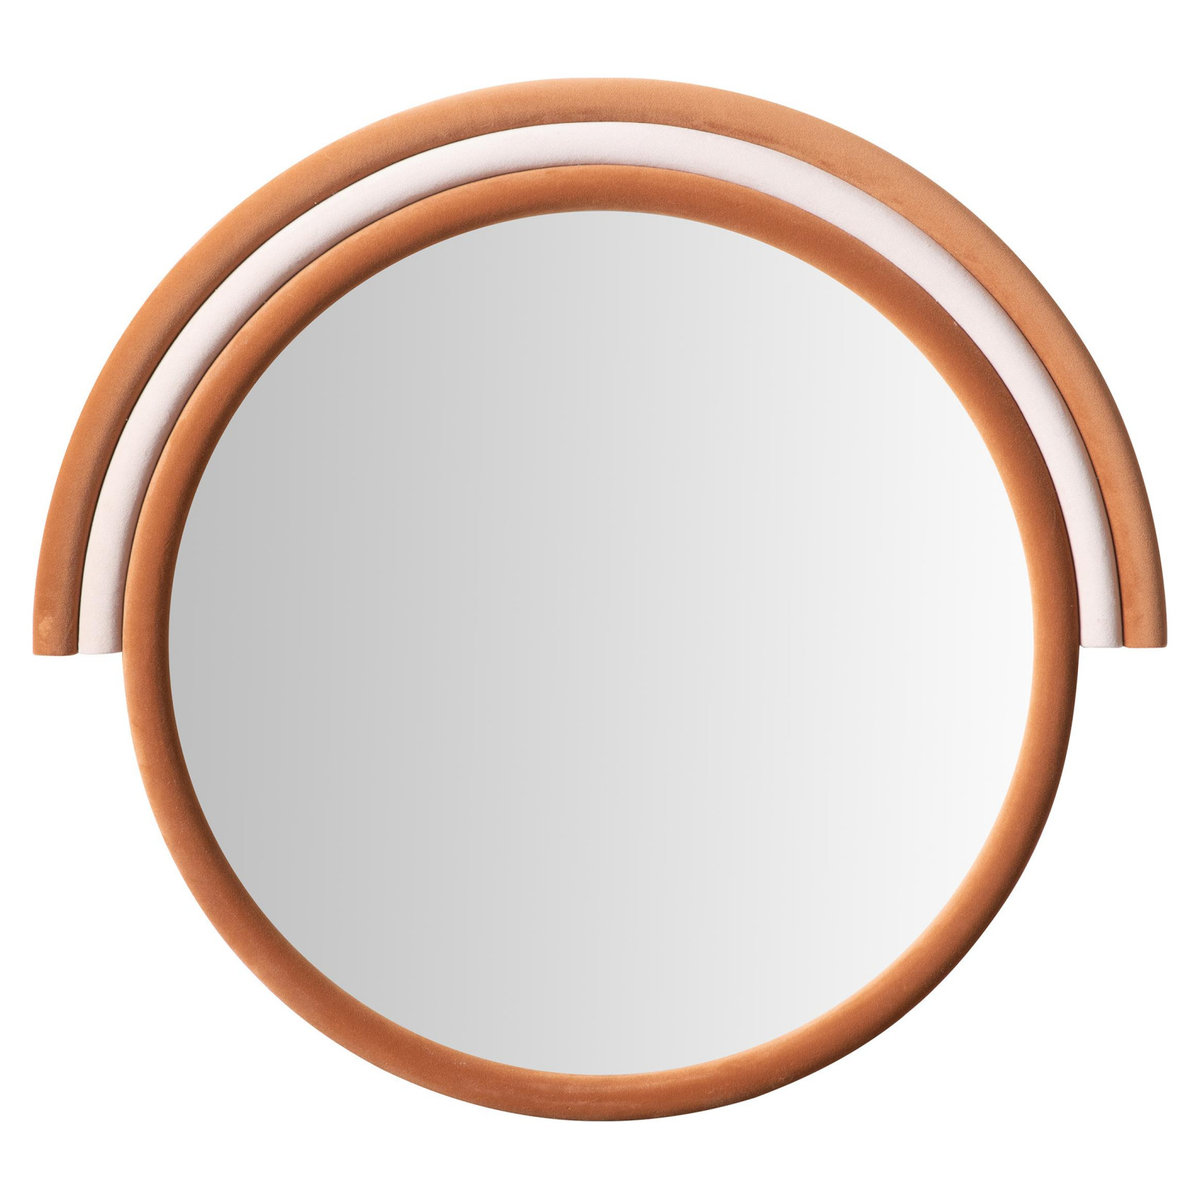 Lally Wall Mirror, Terracotta, Round